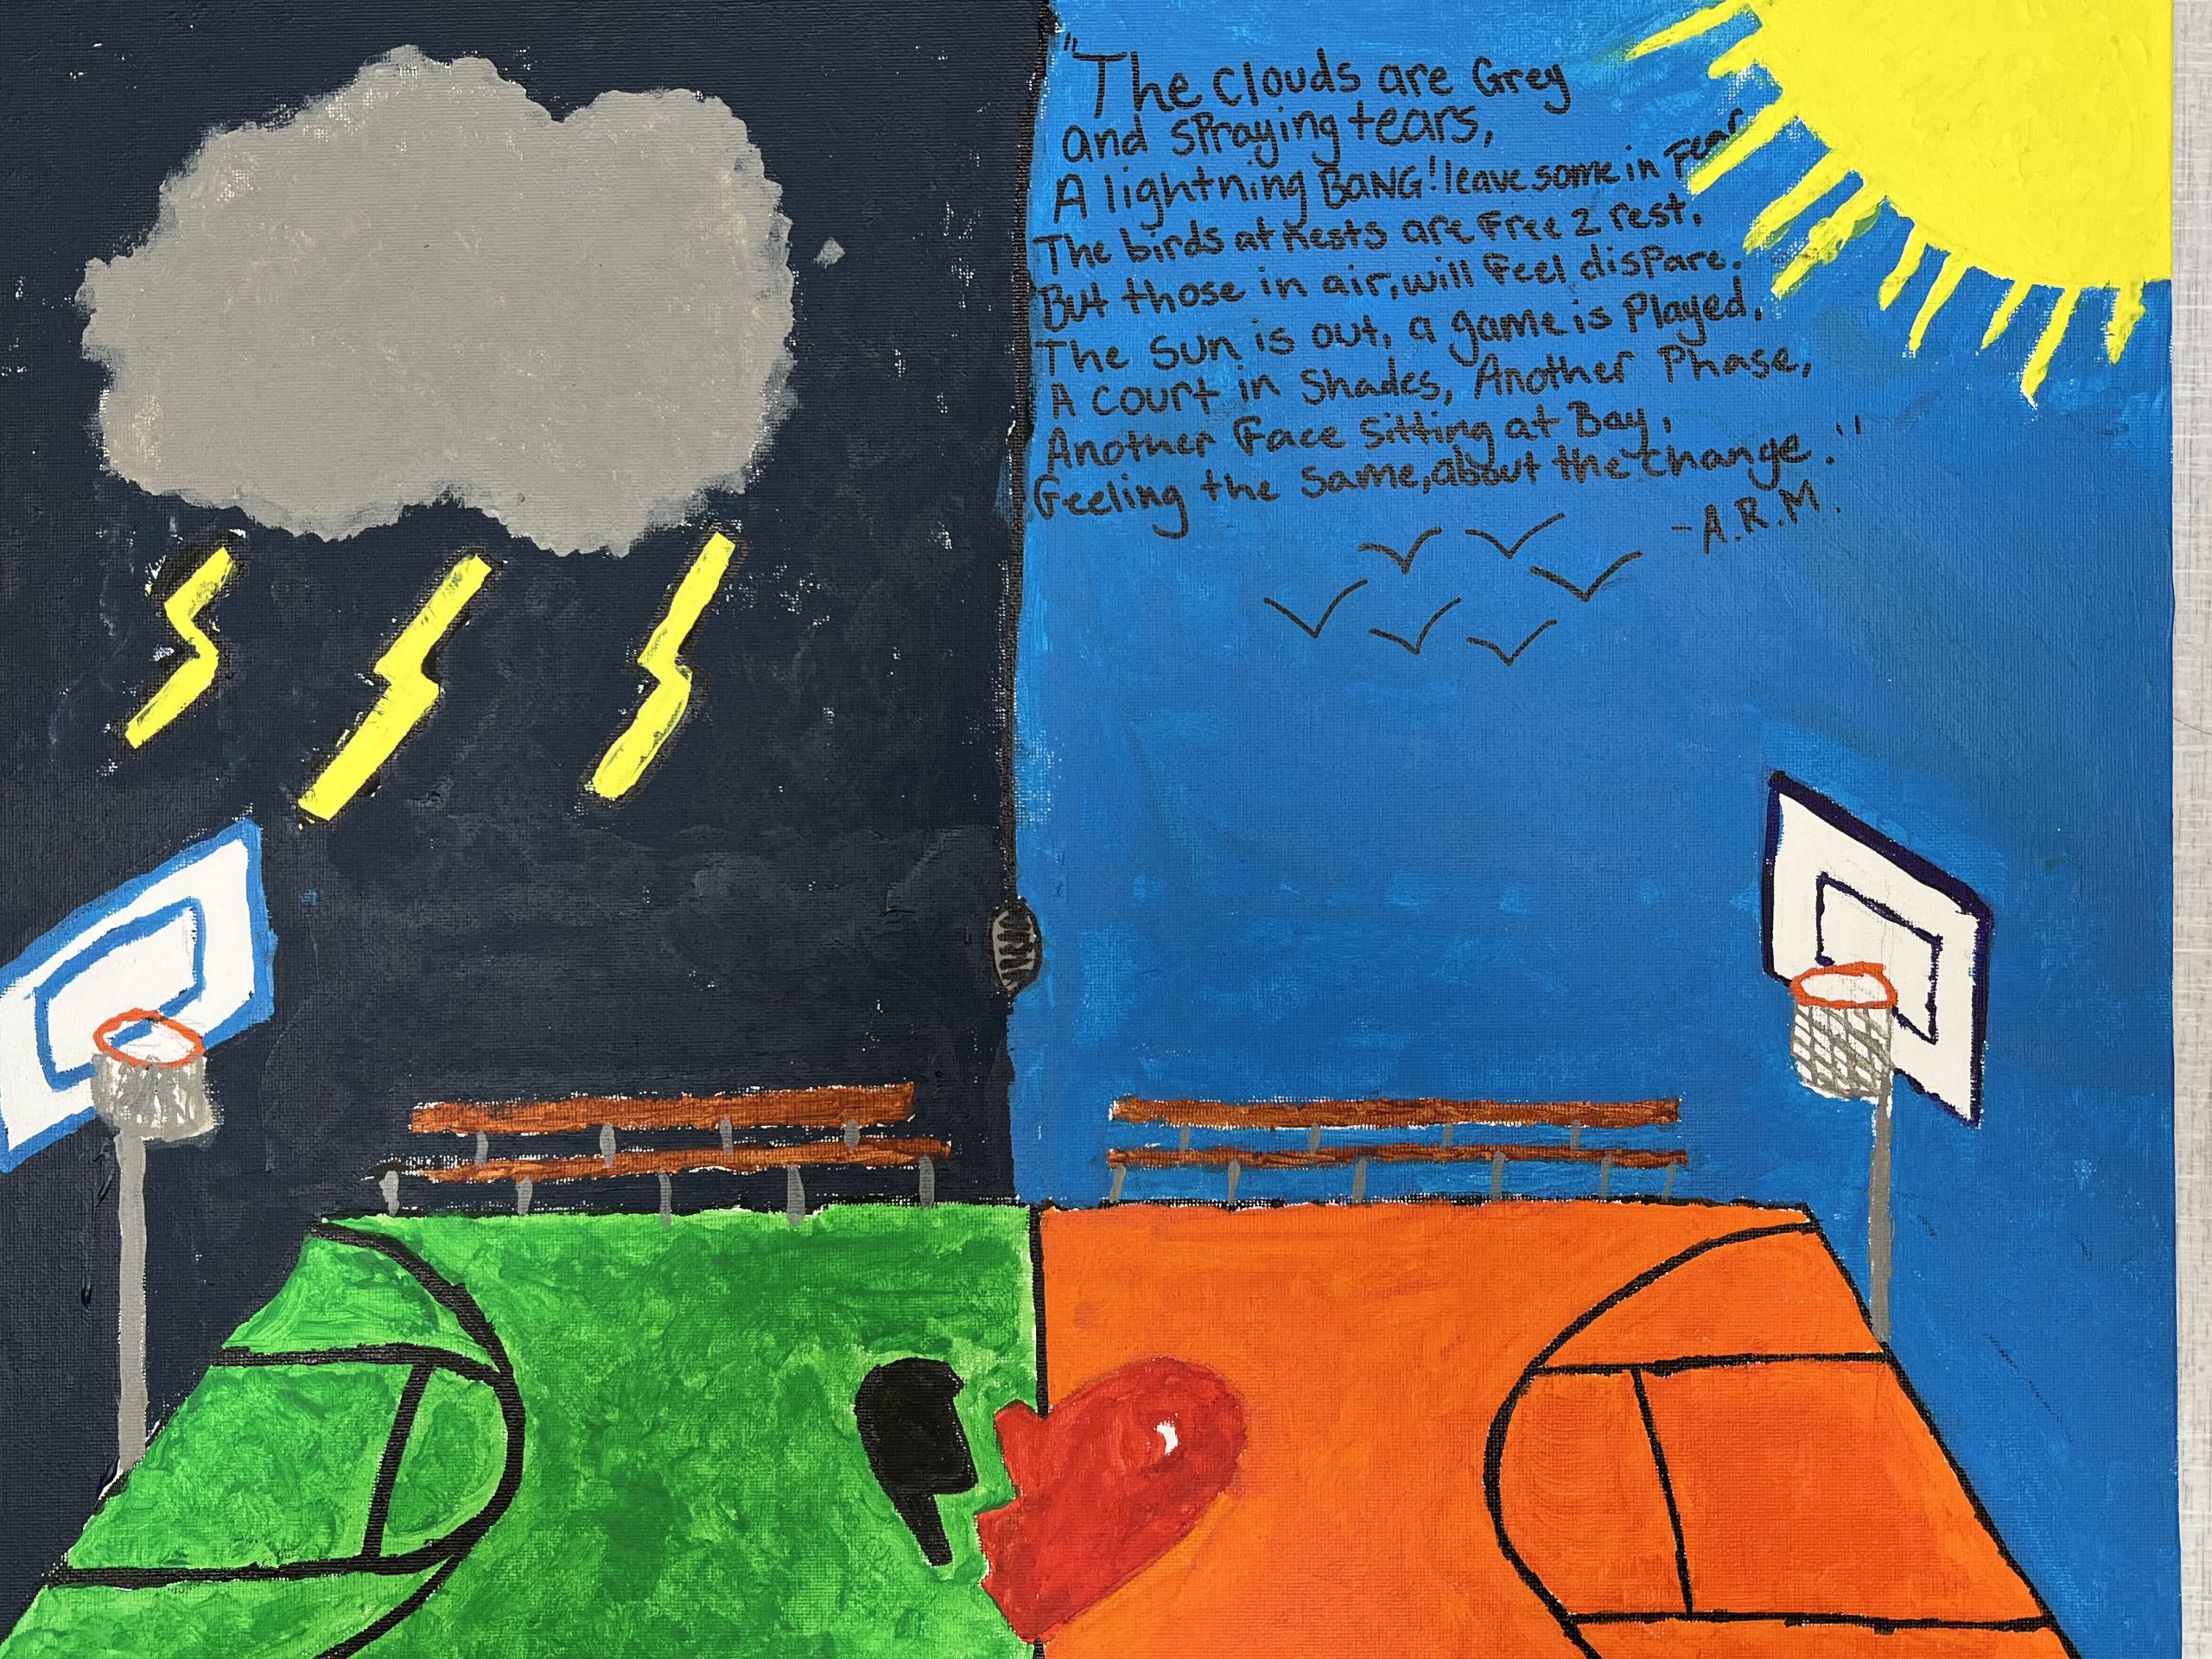 Picture that was referenced above of a basketball court both in a rainstorm and a sunny day. 